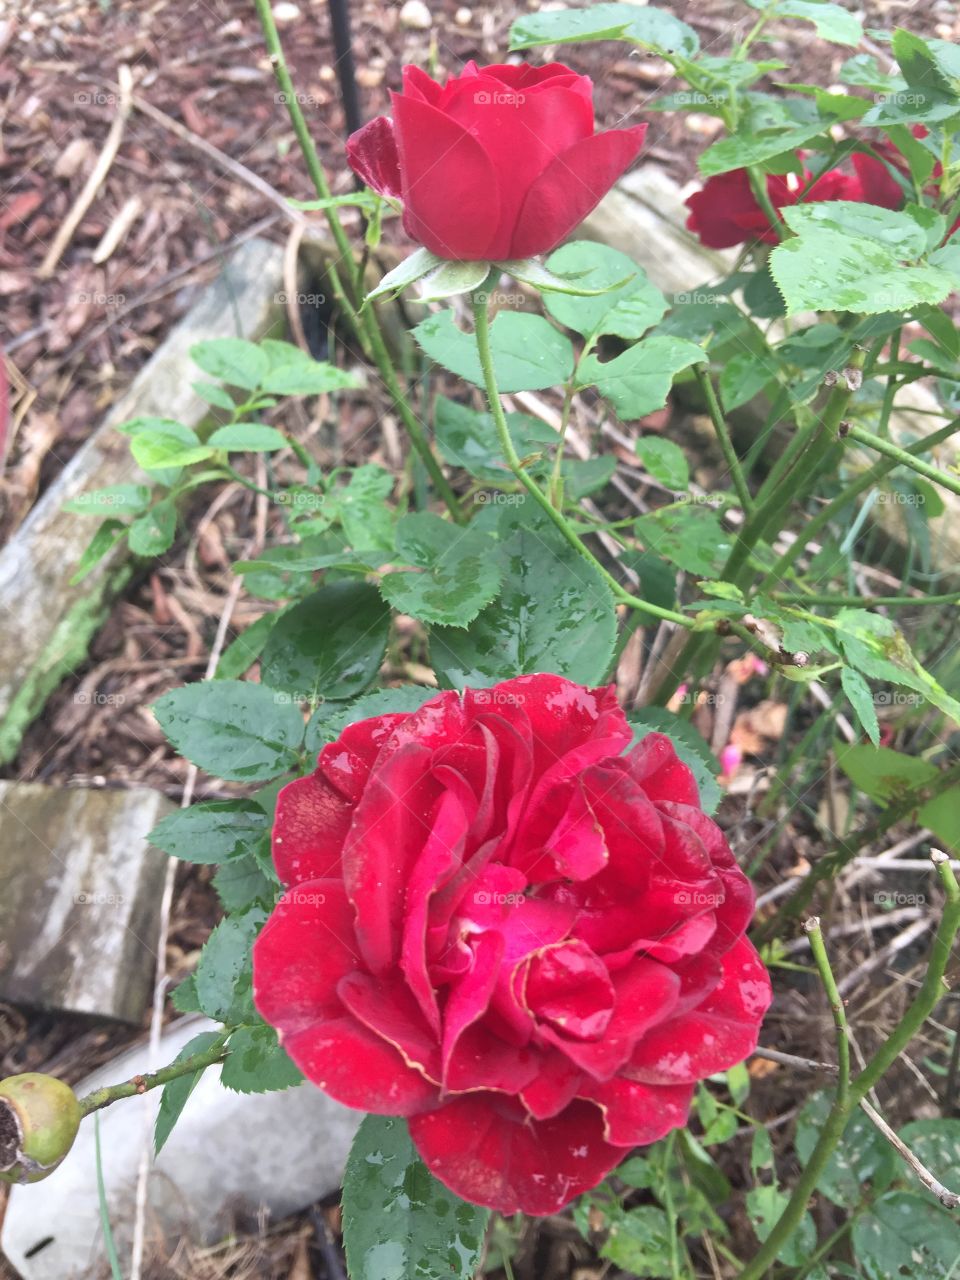 Last of the roses